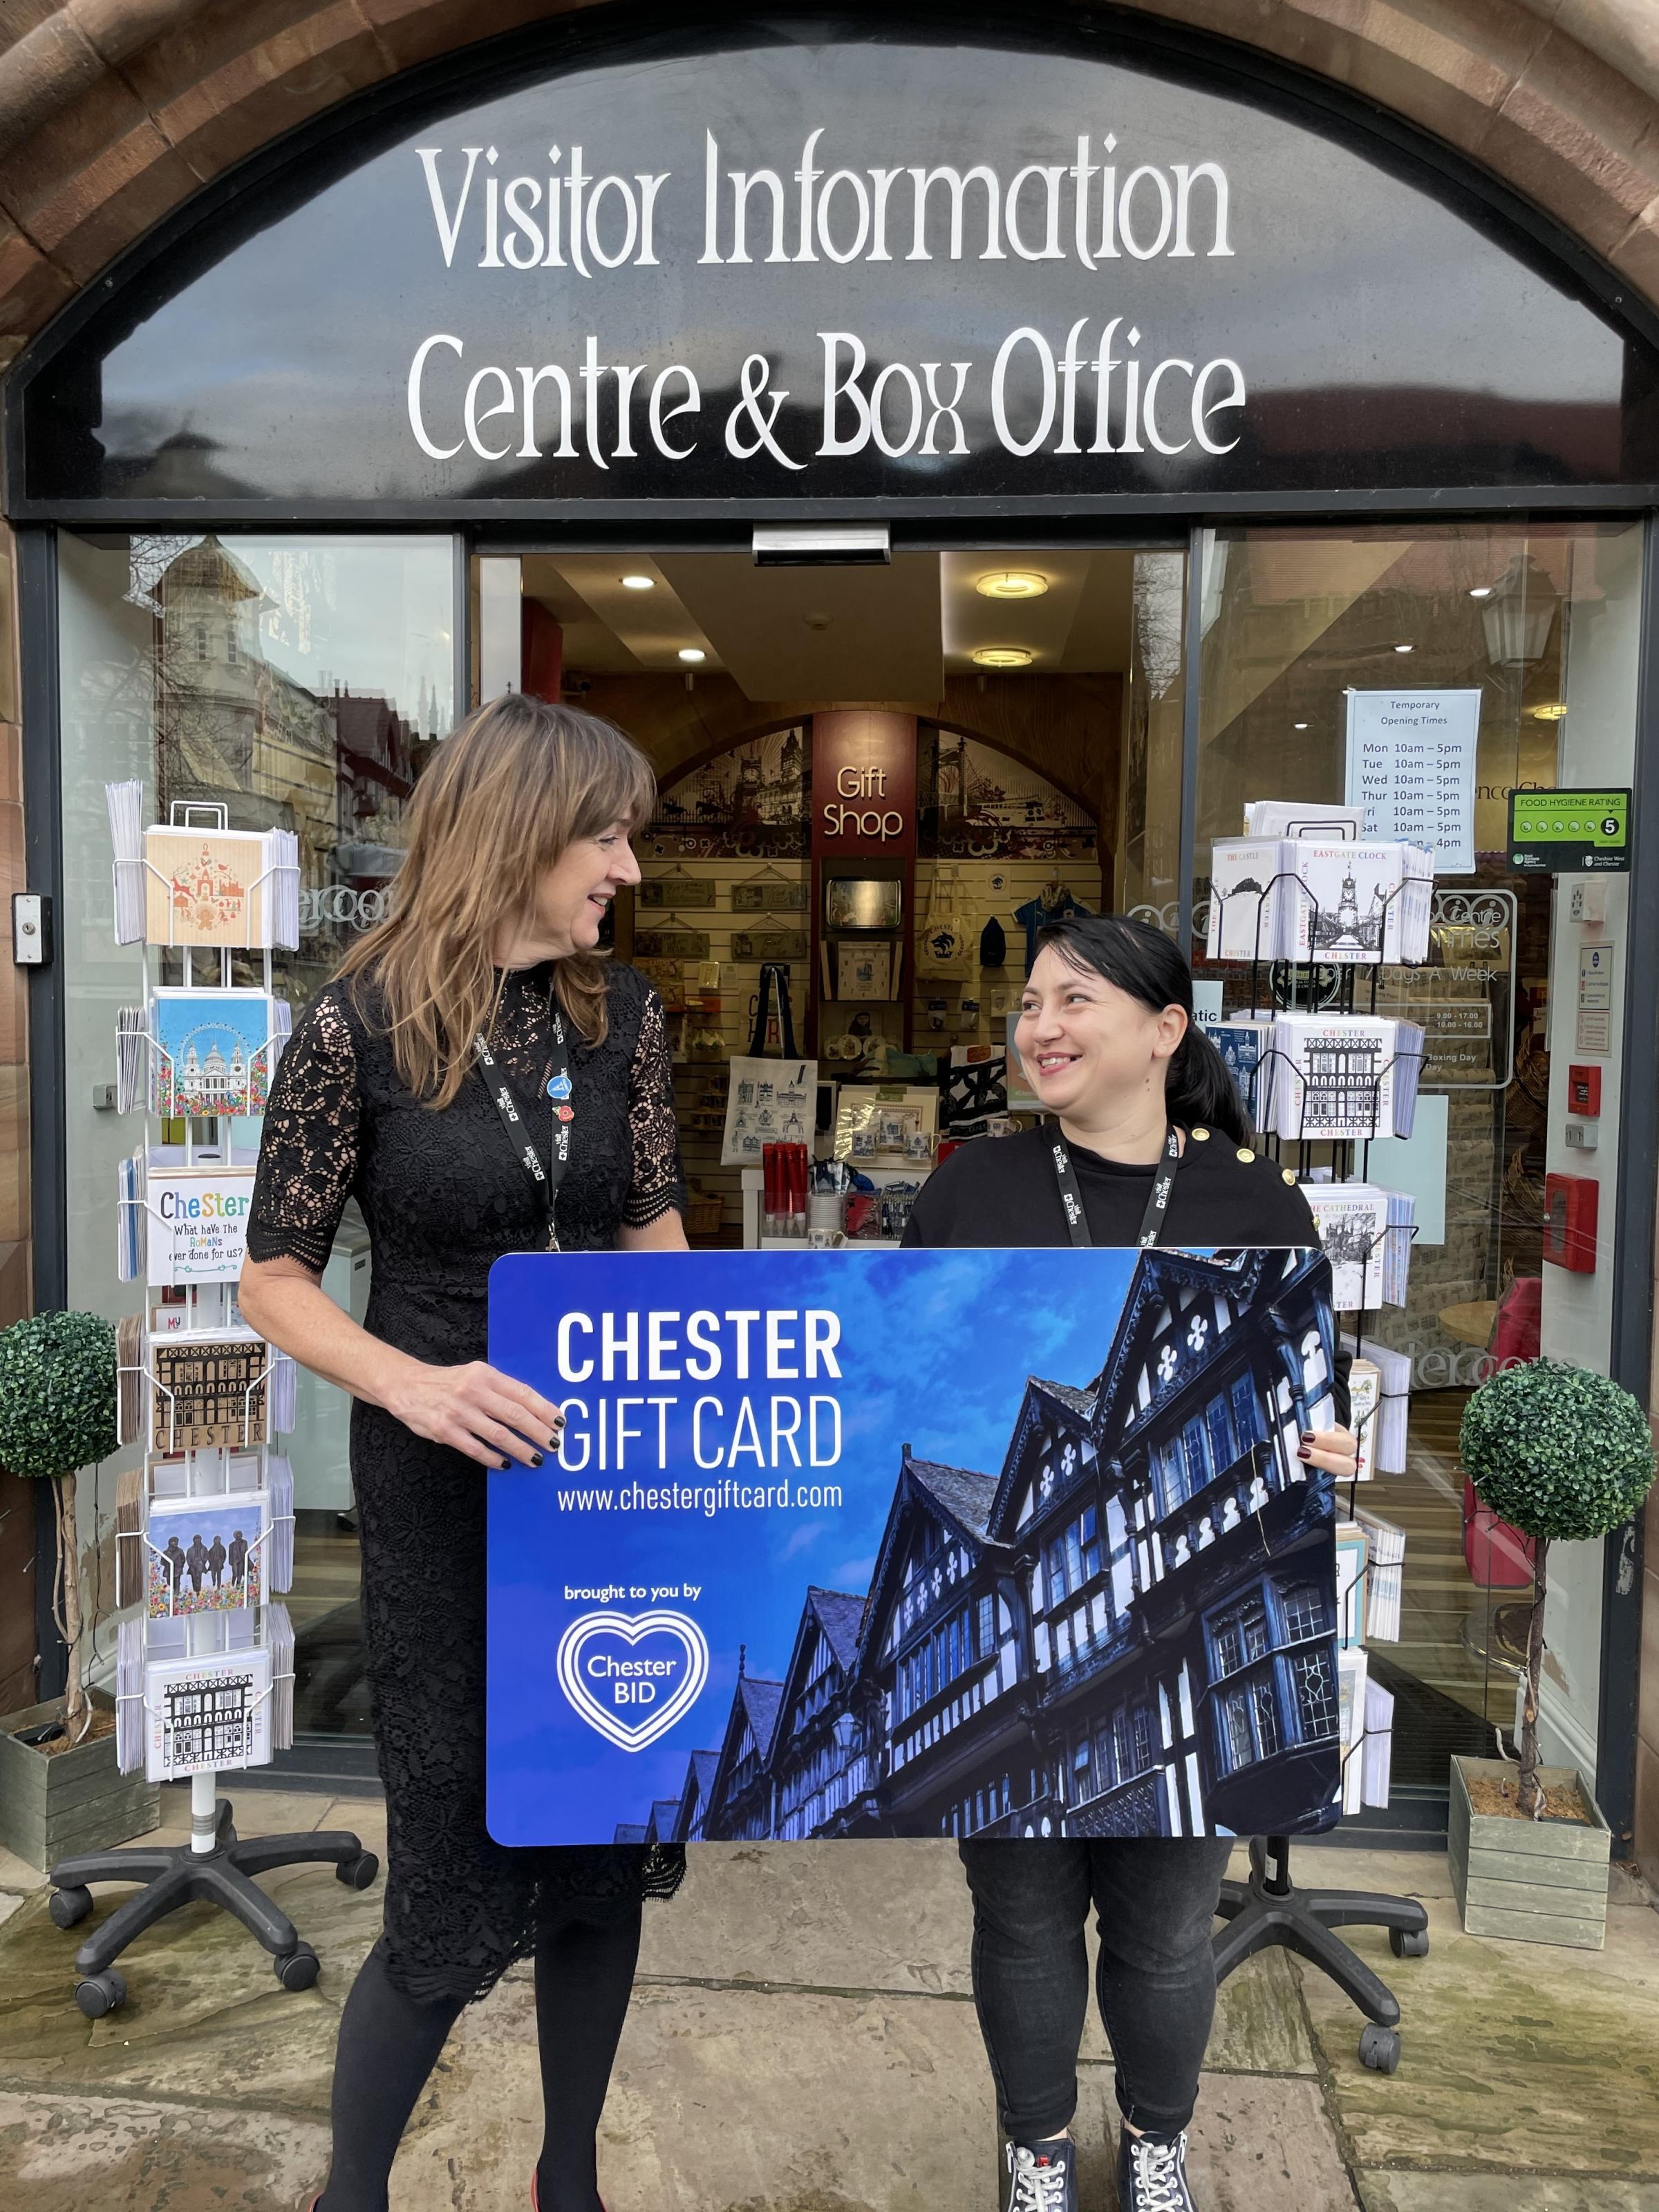 Visitor Information Centre where you can buy a Chester Gift Card in person.